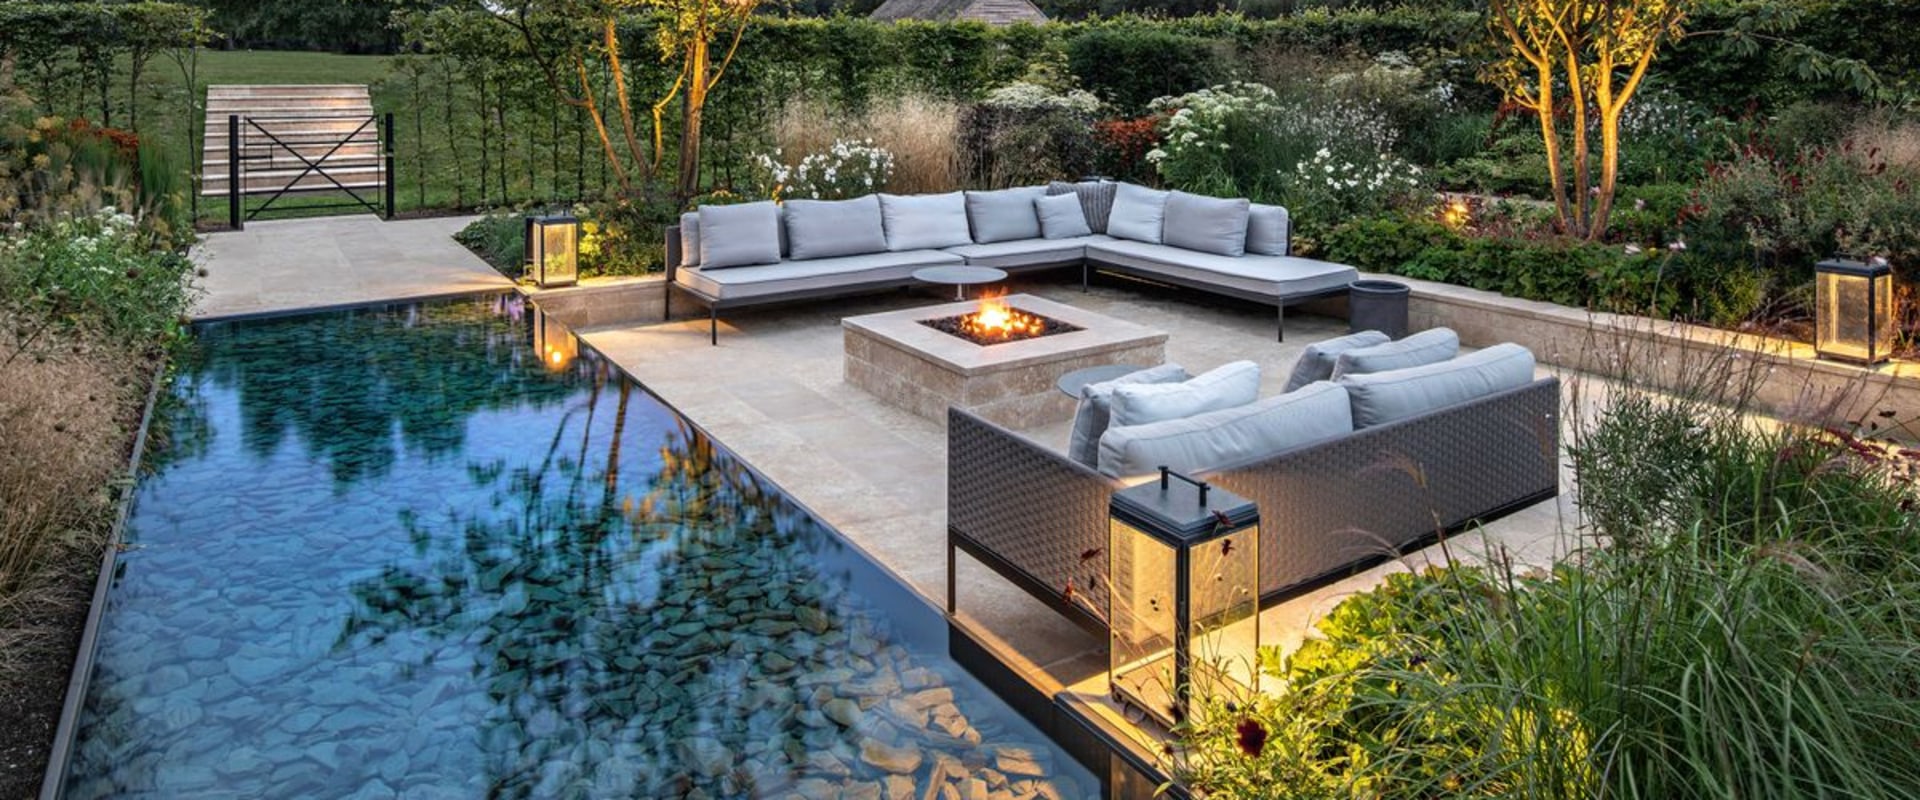 Adding Lighting and Decorative Features to Enhance Your Landscape Design